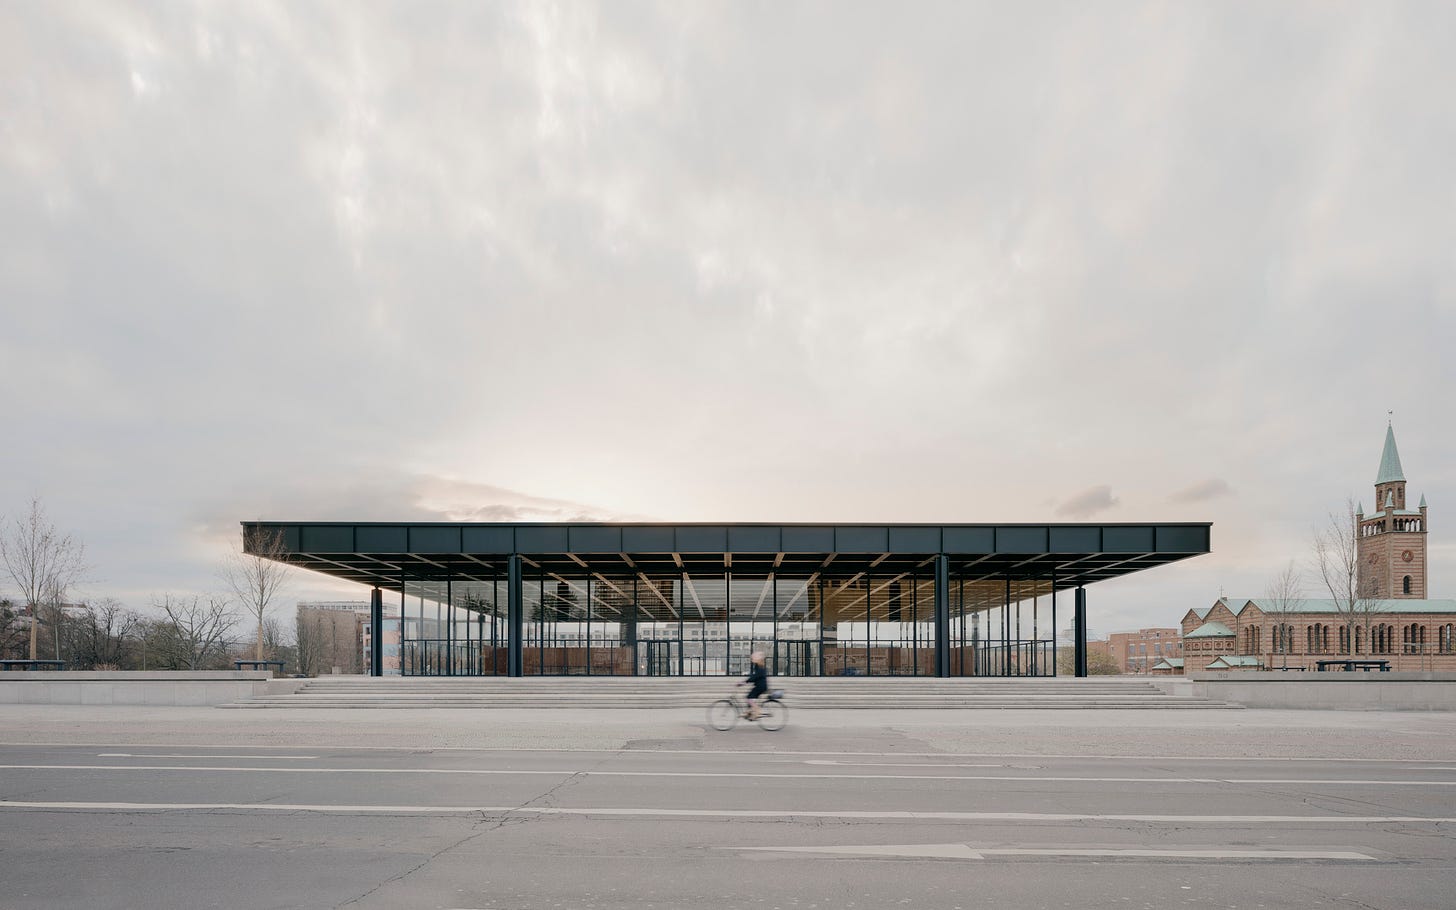 Neue Nationalgalerie / David Chipperfield Architects | ArchDaily